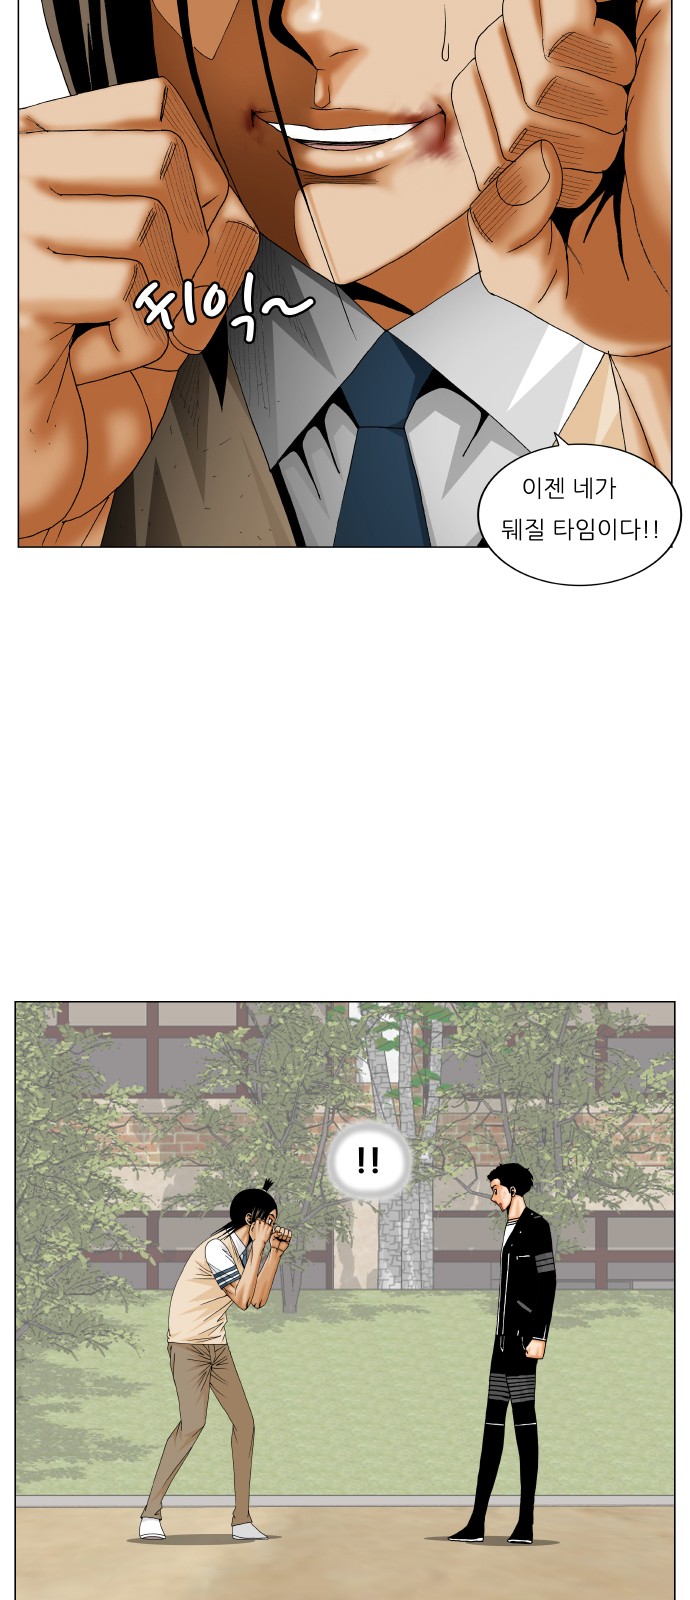 Ultimate Legend - Kang Hae Hyo - Chapter 246 - Page 3